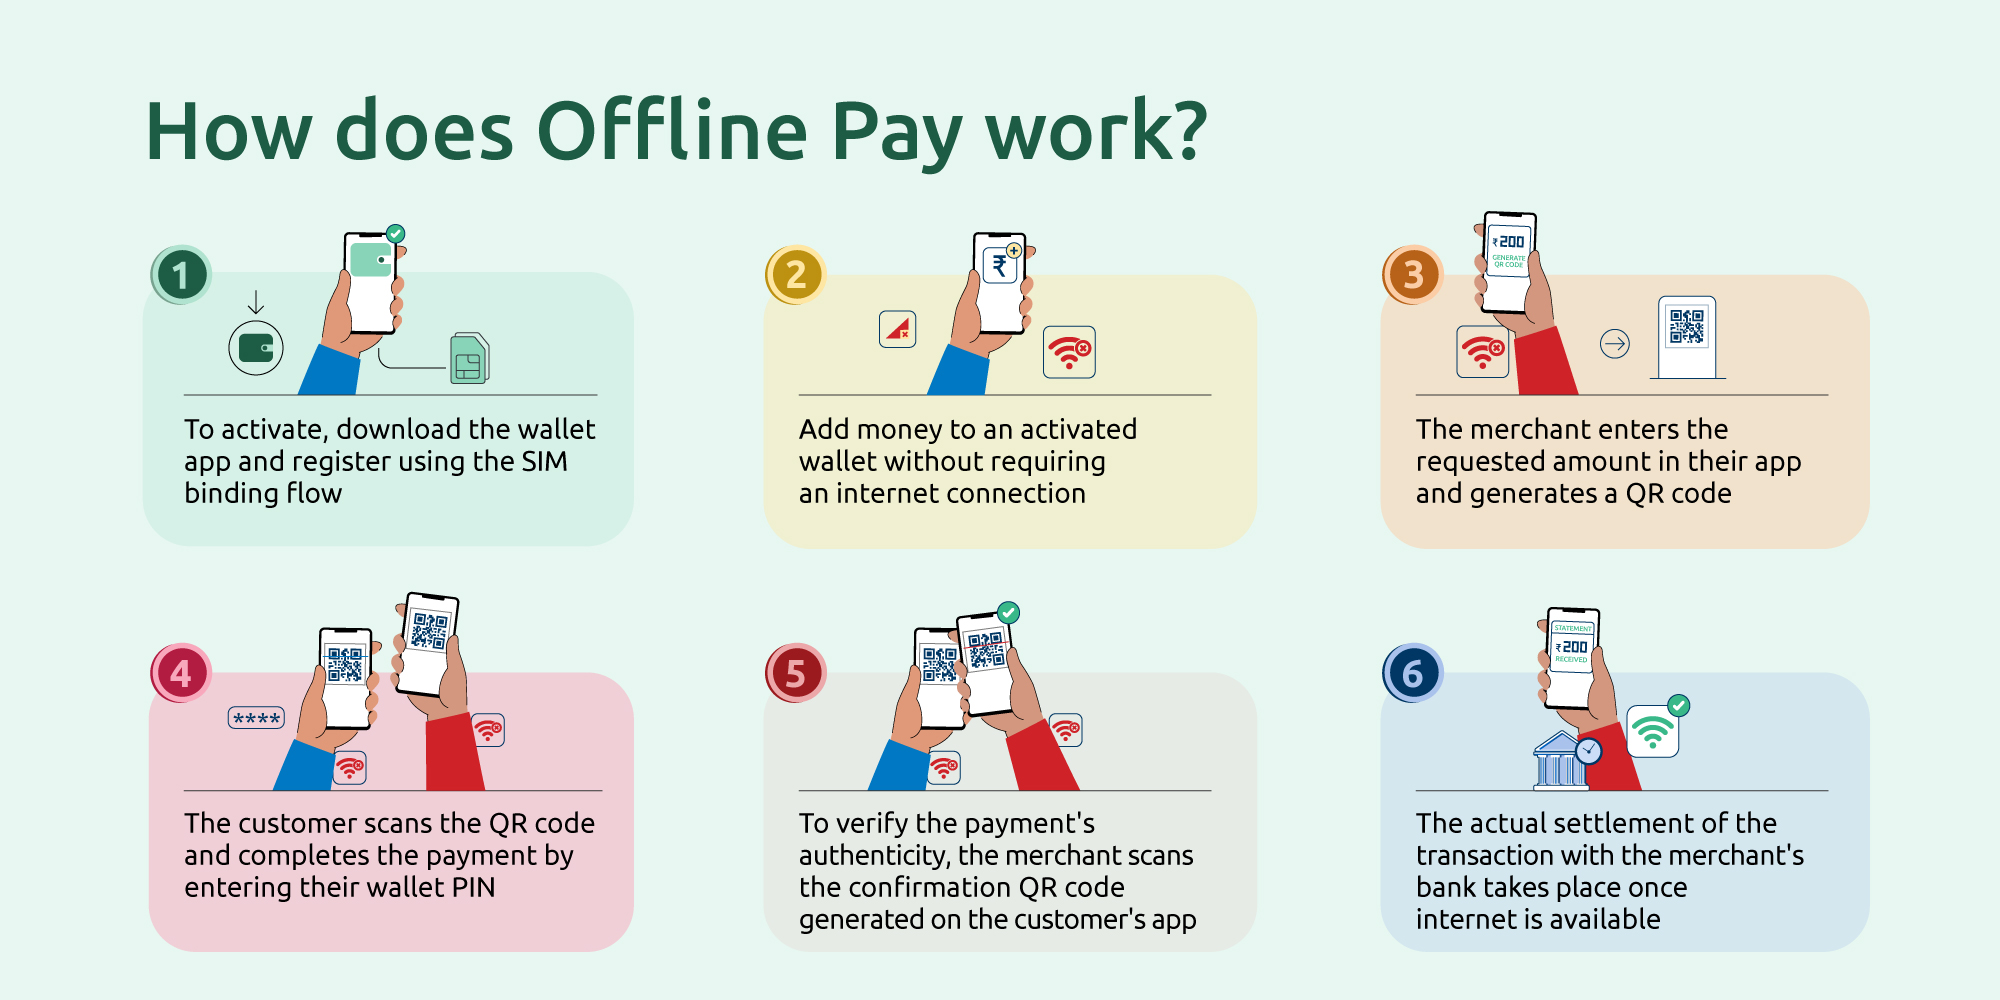 How does Offline Pay work?